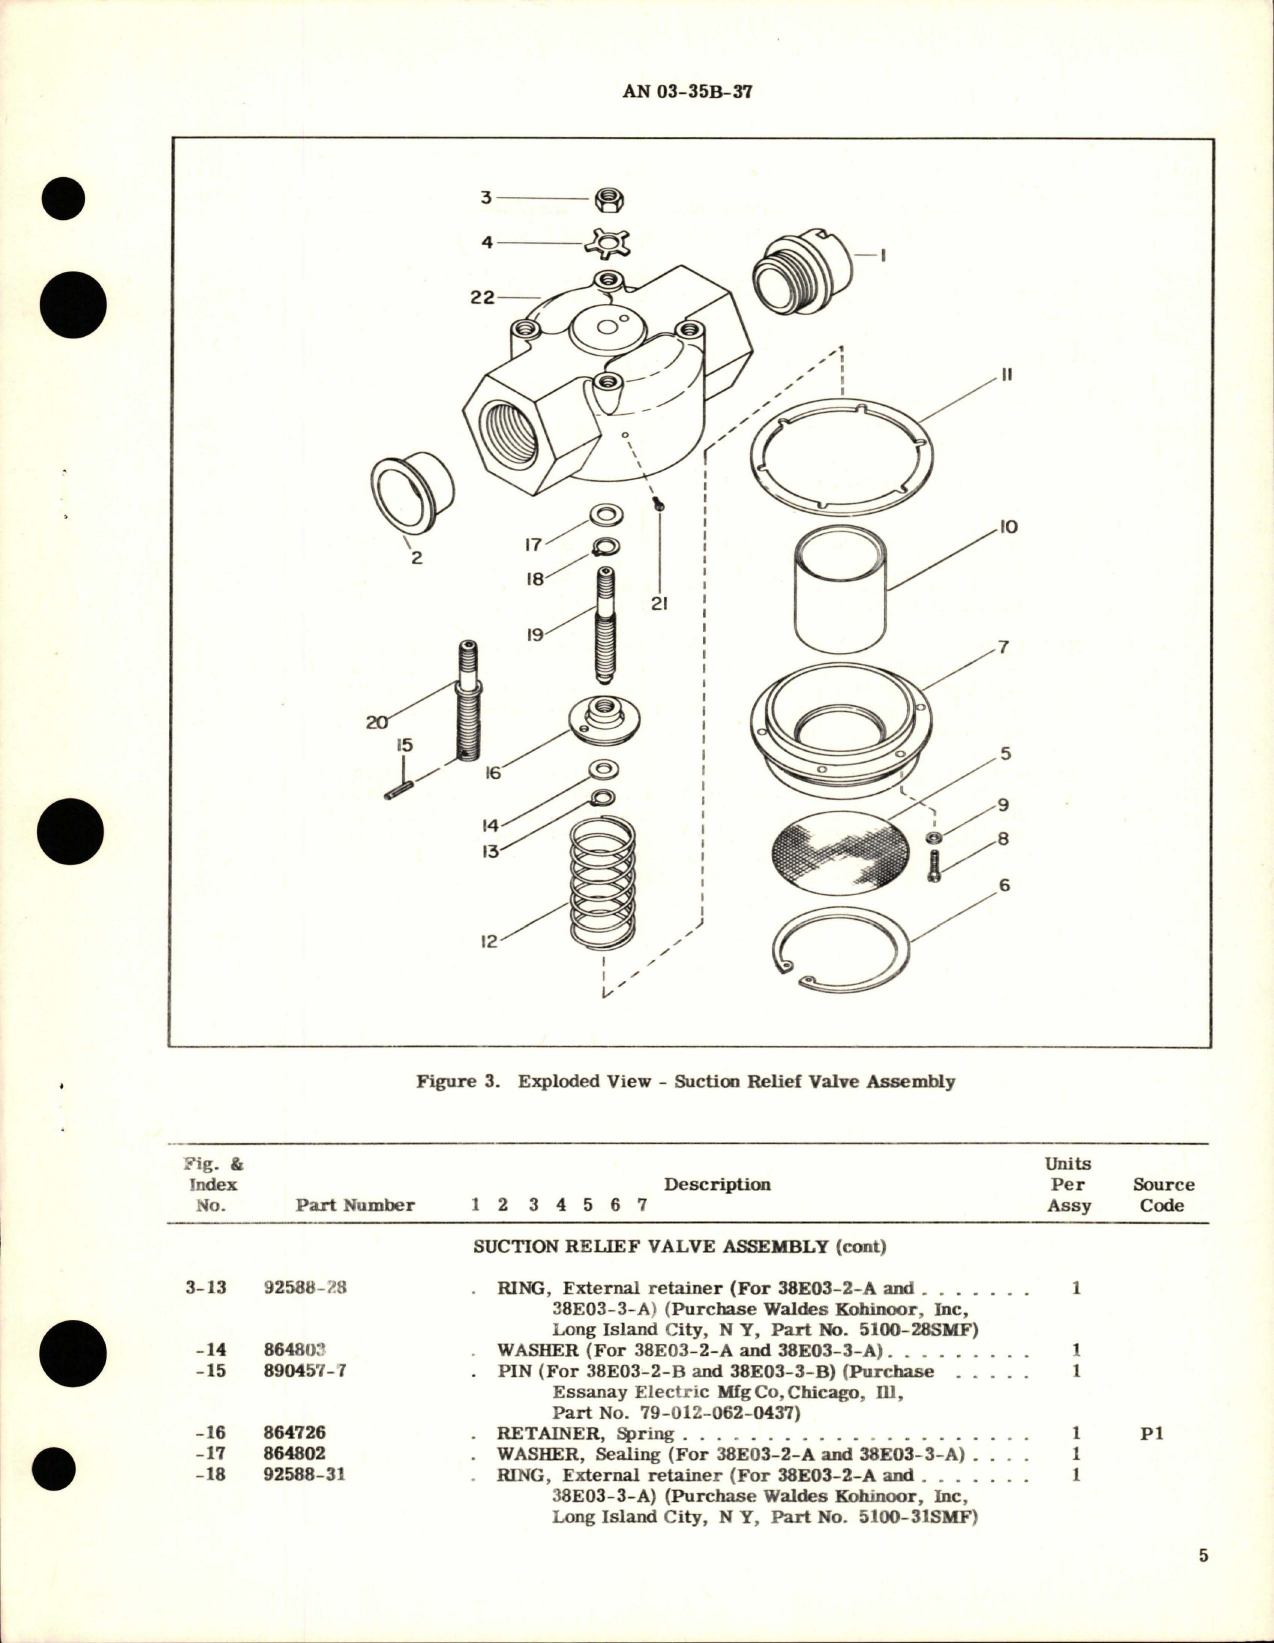 Sample page 5 from AirCorps Library document: Overhaul Instructions with Parts Breakdown for Suction Relief Valve - Parts 38E03-2-A, 38E03-2-B, 38E03-3-A, and 38E03-3-B